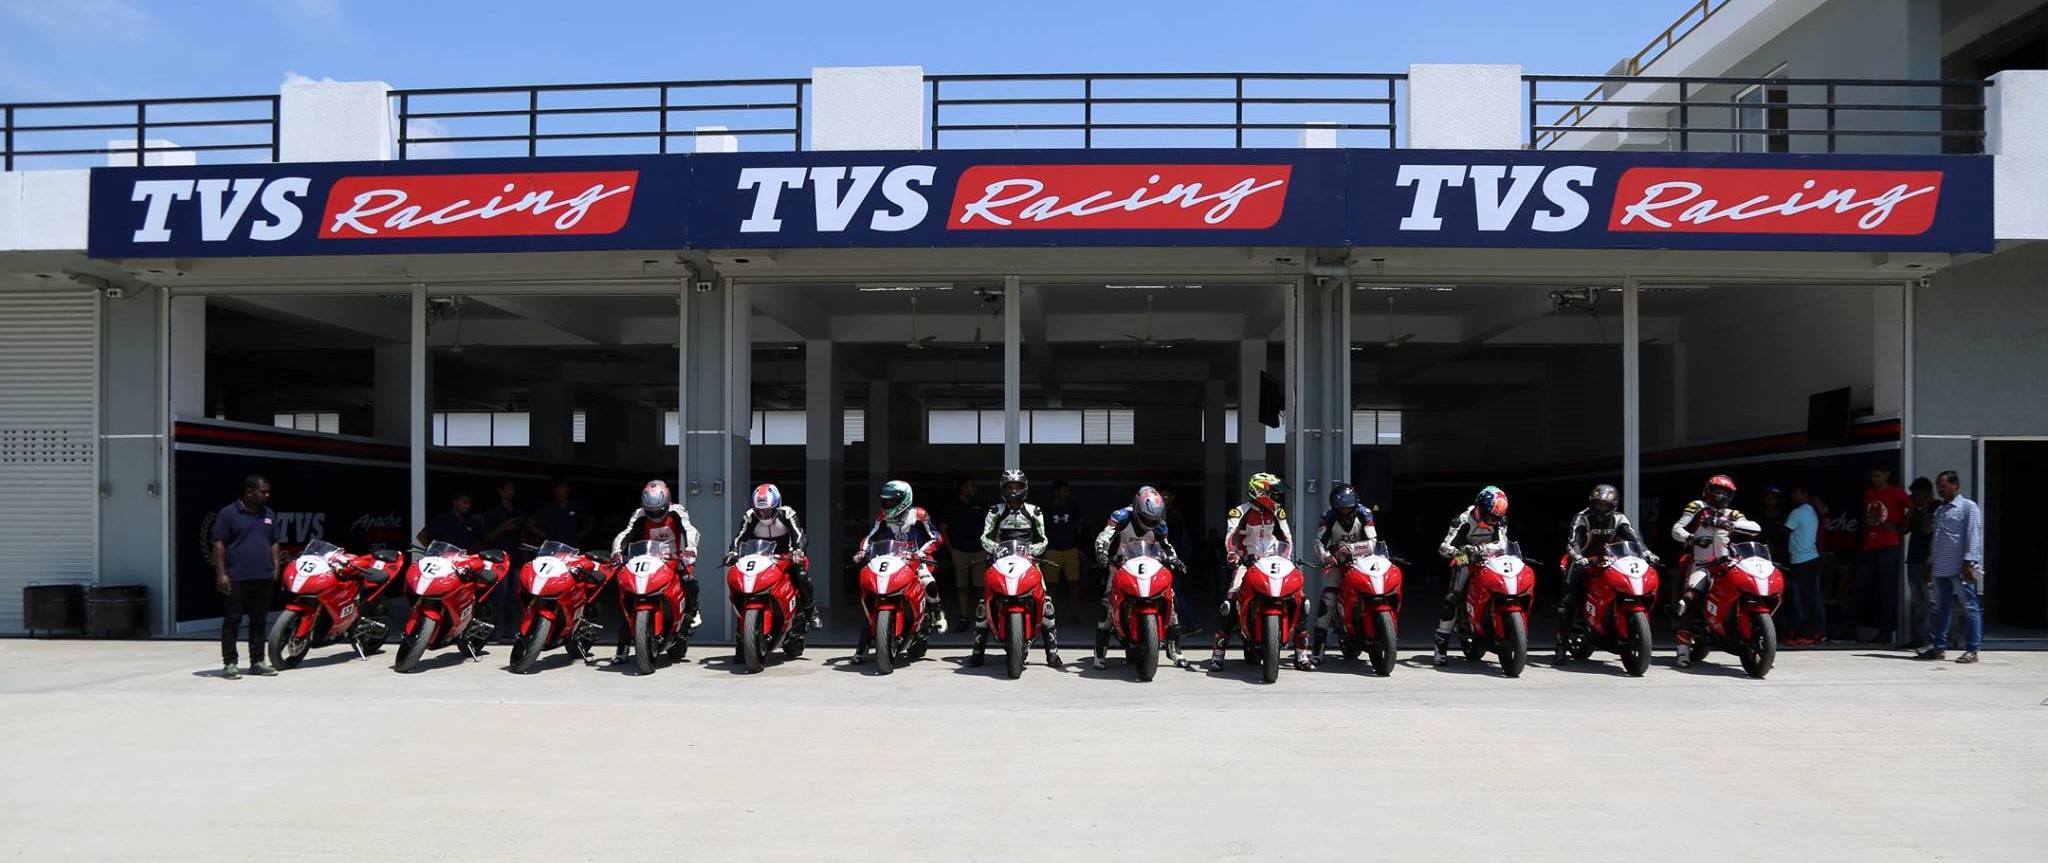 45HP TVS Apache RR 310 Race Version Officially Unveiled - foreground